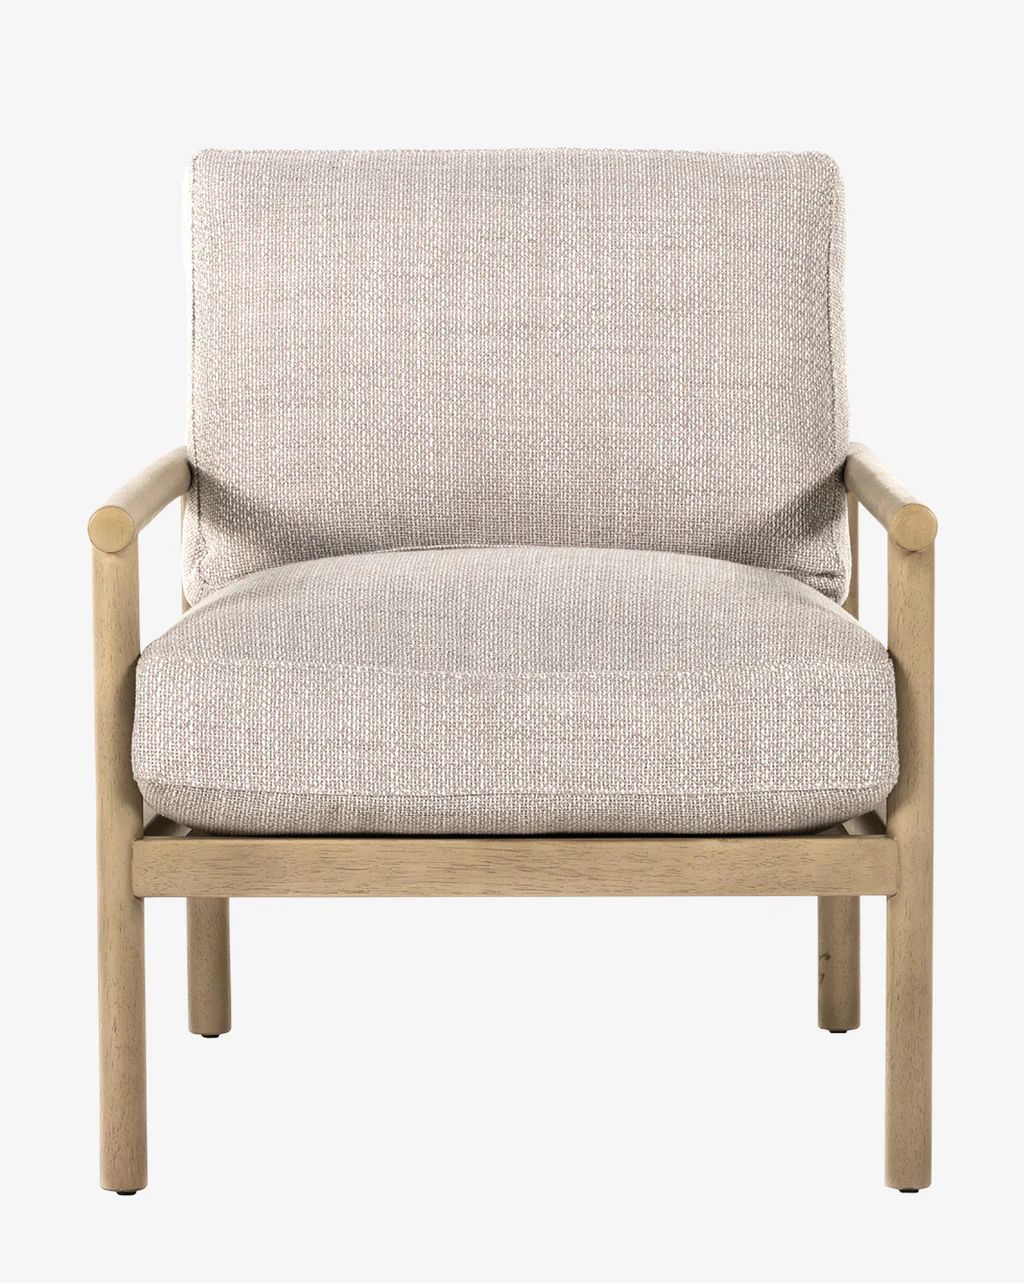 Delly Lounge Chair | McGee & Co.